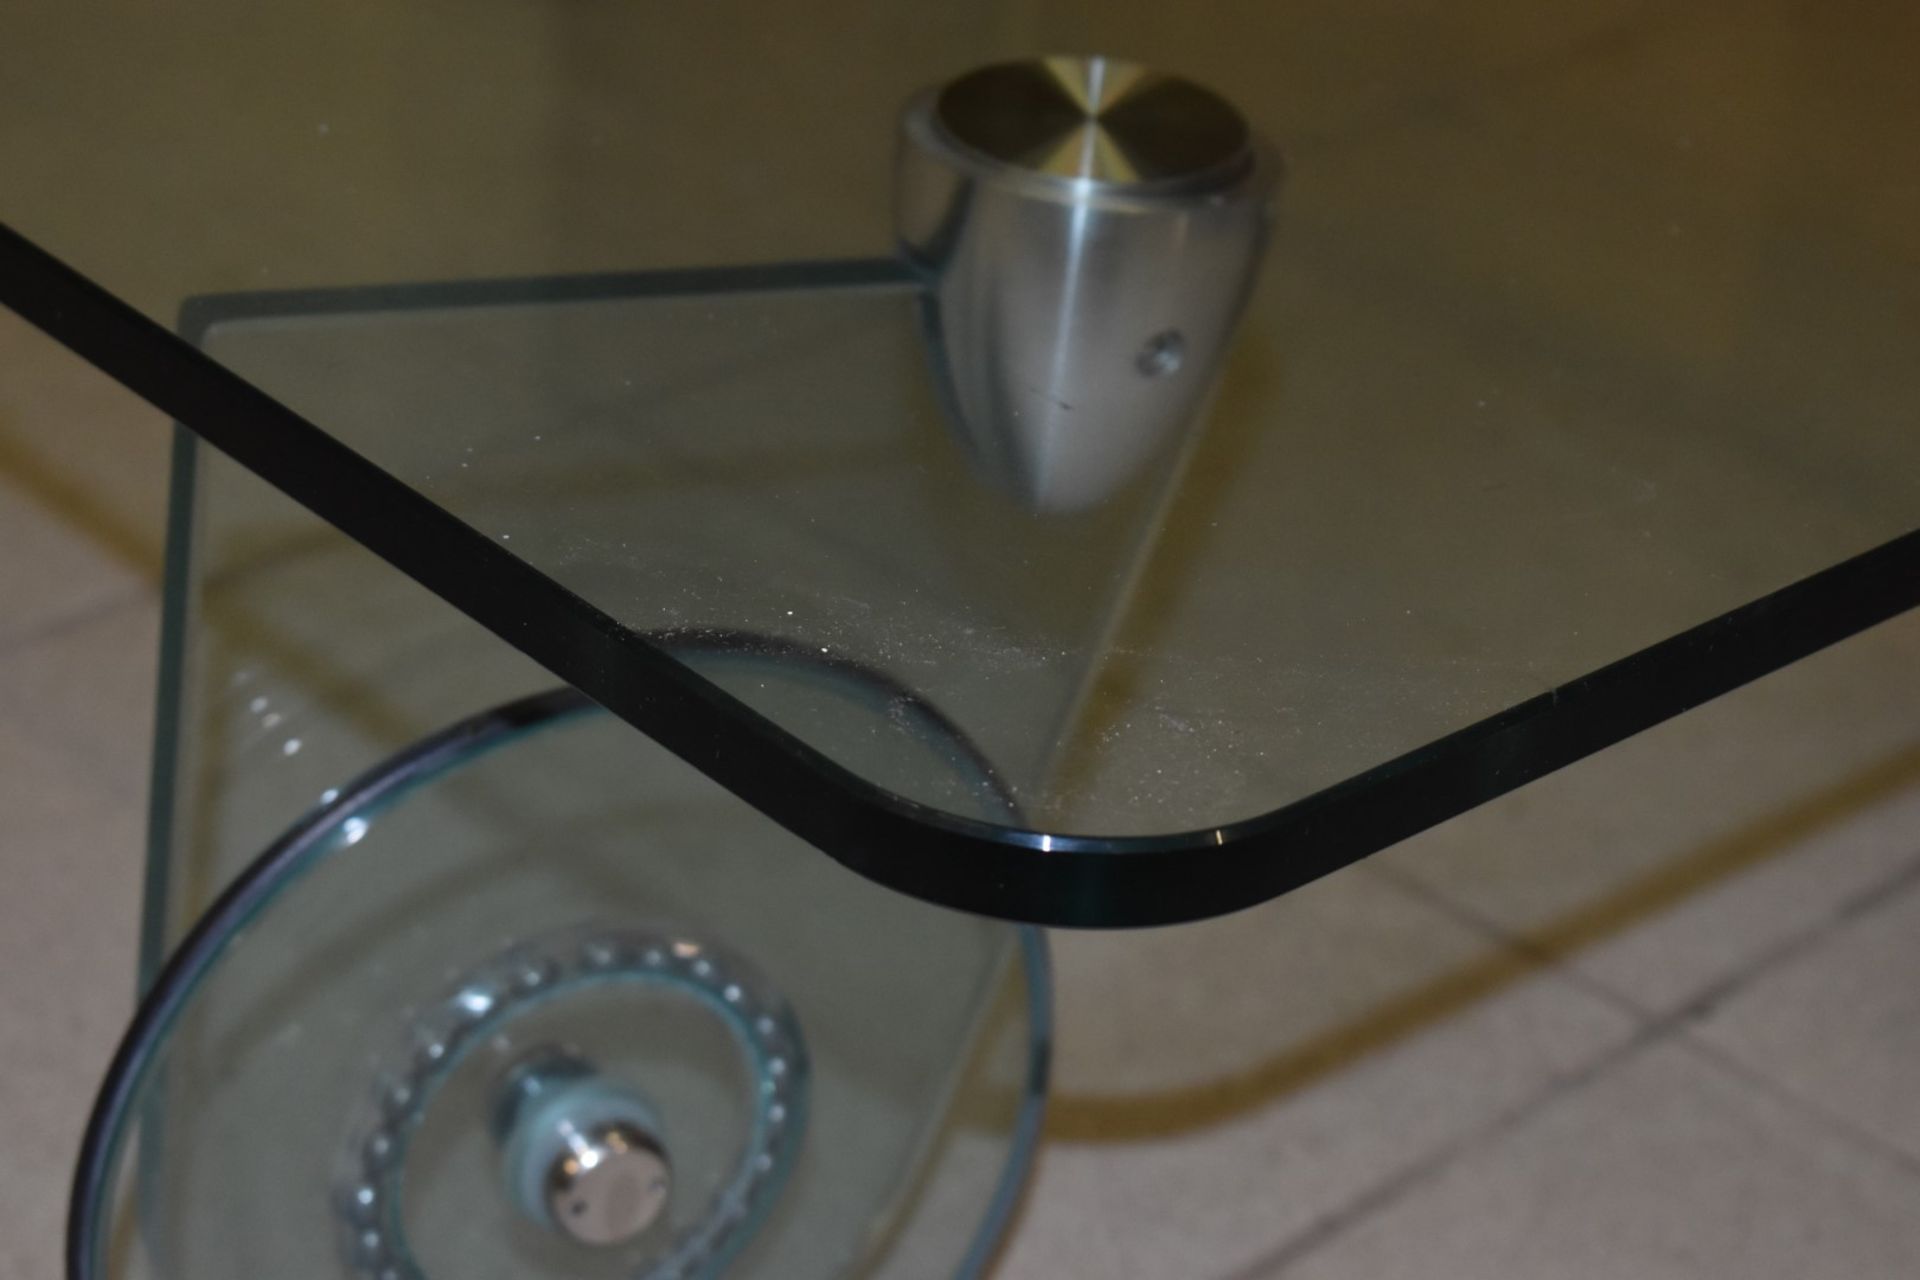 1 x Glass Coffee Table With 2cm Thick Top and Wheel Design Legs - Dimensions: H30 x W125 x D85 cms - - Image 3 of 3